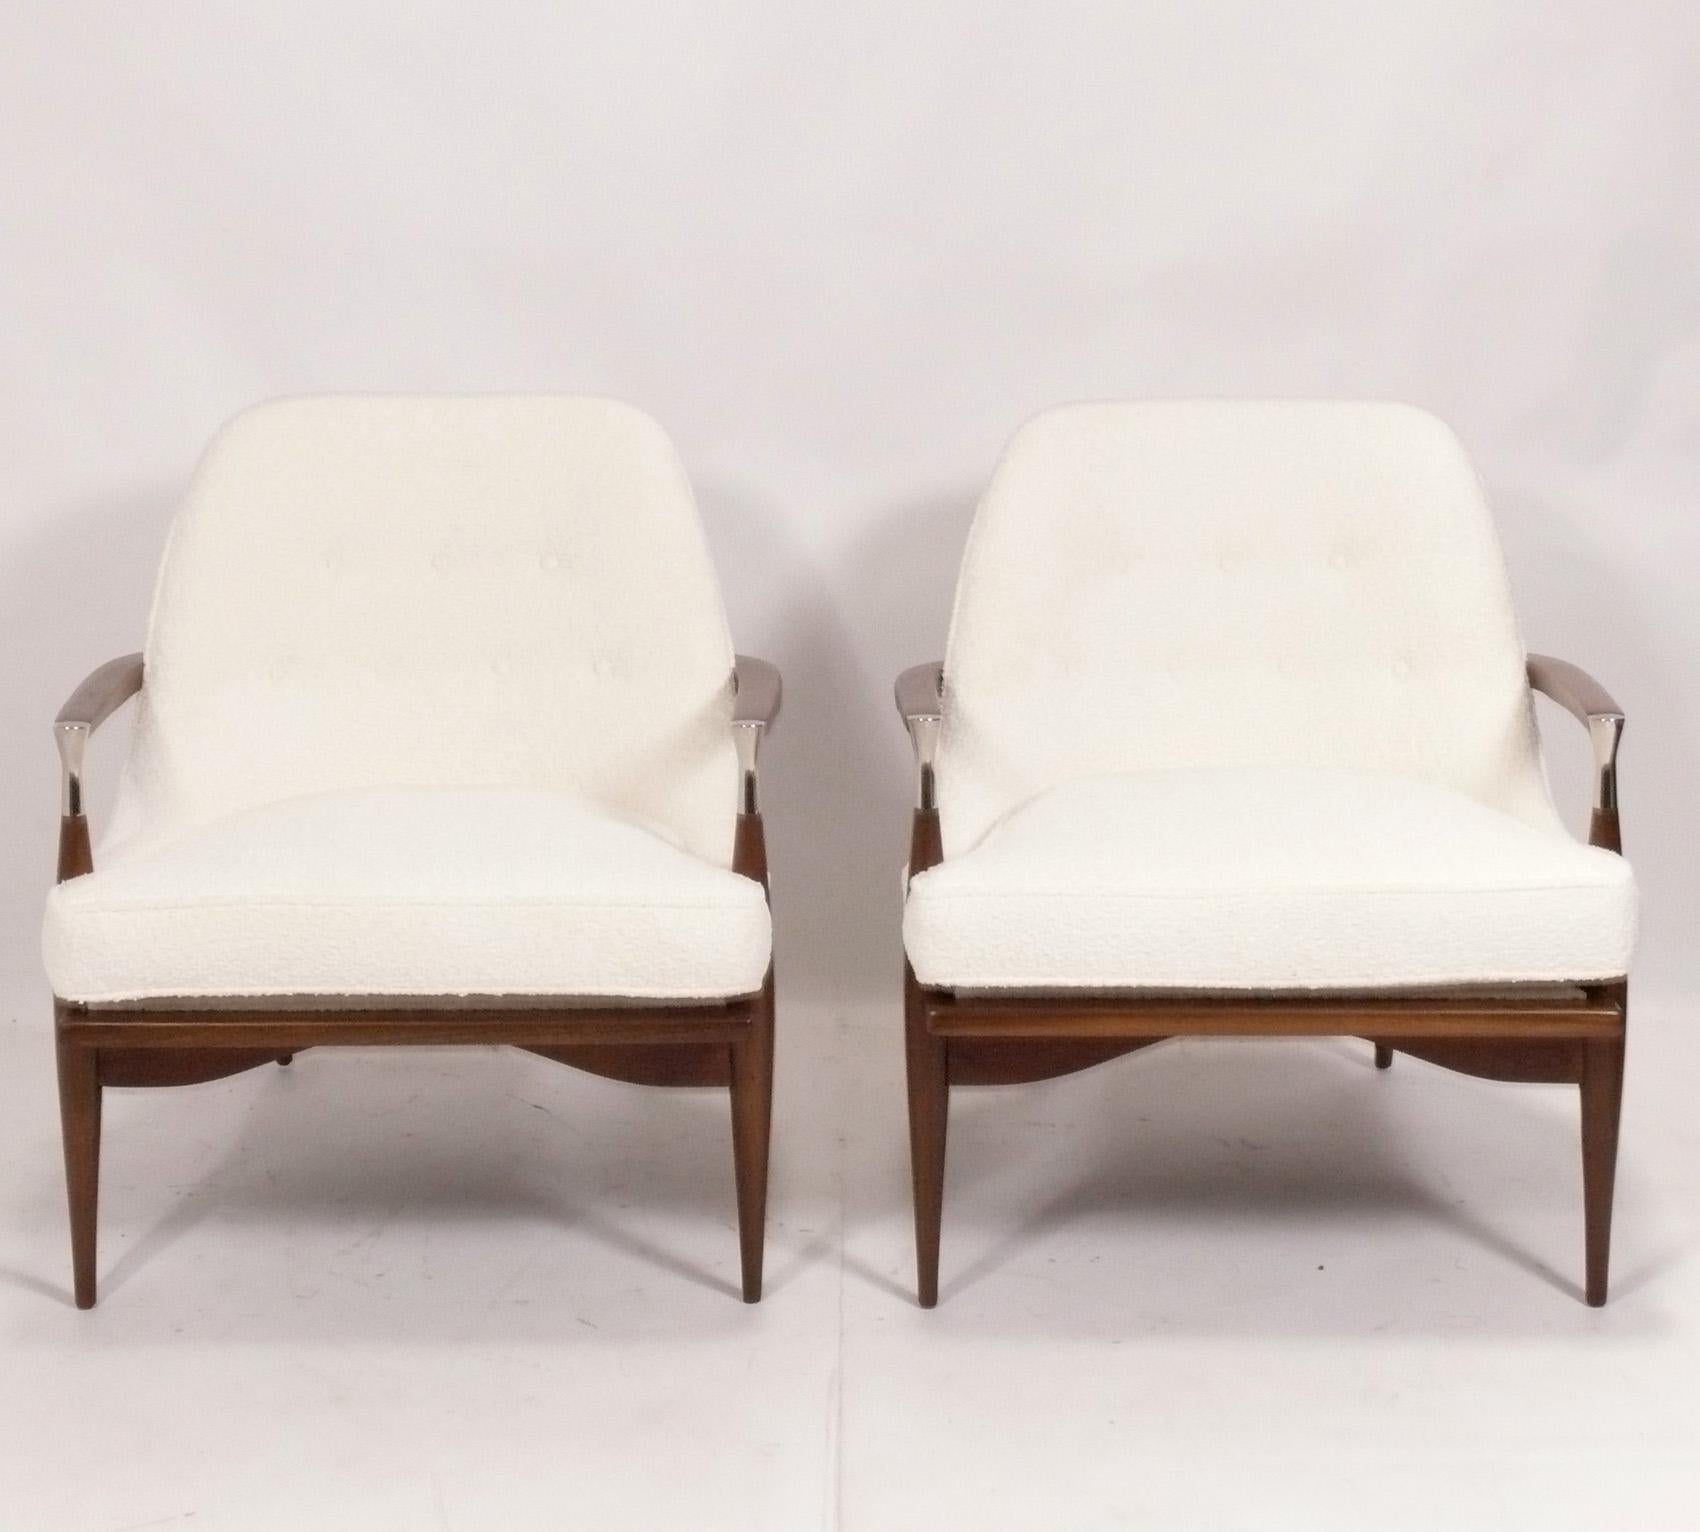 Pair of Danish Modern Lounge Chairs, in the style of Ib Kofod Larsen, Denmark, circa 1960s. They have been completely restored with the walnut frames refinished and reupholstered with new foam and ivory boucle fabric. 